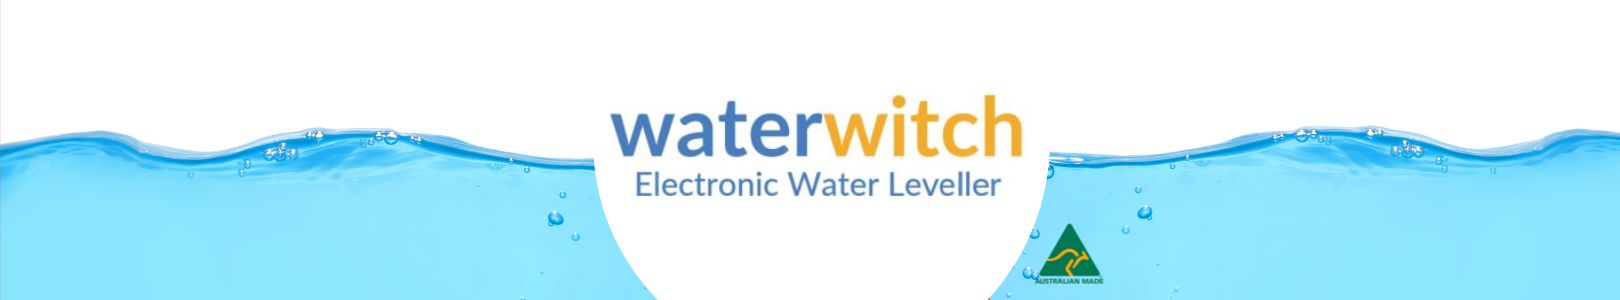 <p style="text-align: center;">Designed and manufactured exclusively in Australia, The Water Witch is an electronic automatic water levelling device which uses a unique <br>and patented electronic sensor to detect if the water in your pool is below the recommended level.</p>
<ul>
<li style="list-style-type: none;">
<p style="text-align: center;">The Water Witch is suitable for any type of pool or spa and is also suitable for ponds, tanks and water features.</p>
</li>
</ul>